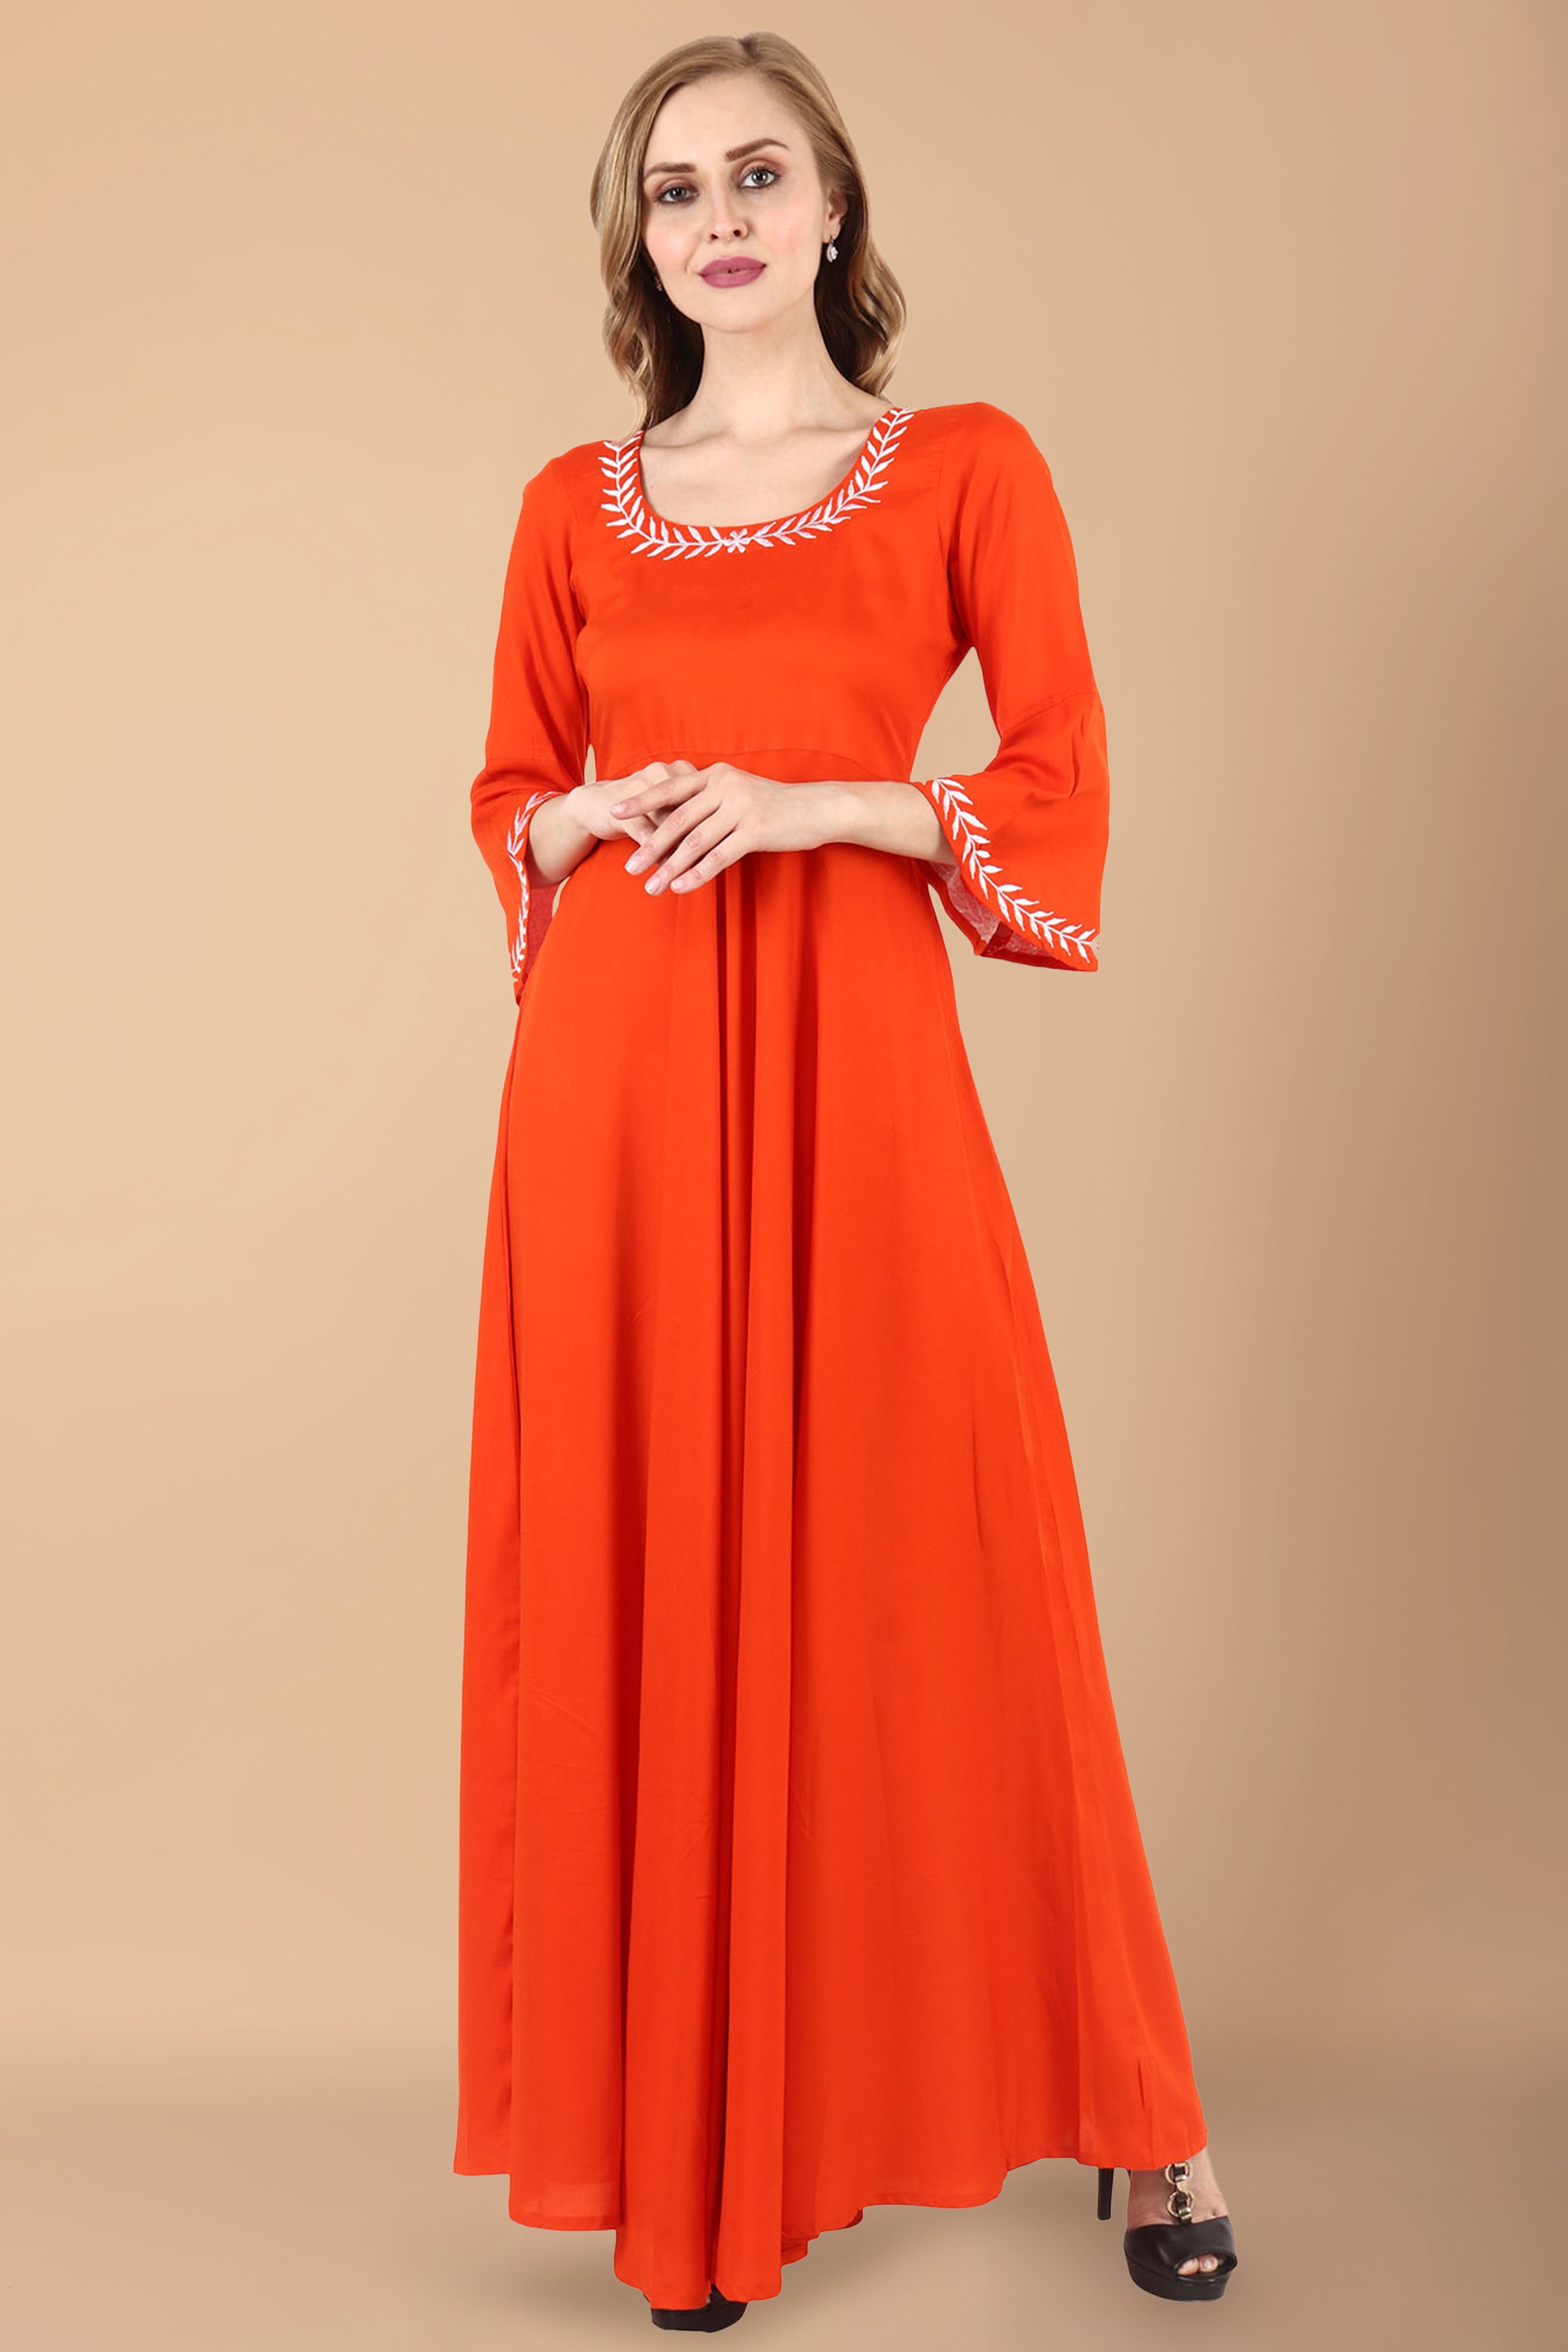 Party Wear Dresses for Women Online | Best Prices in India - Leemboodi